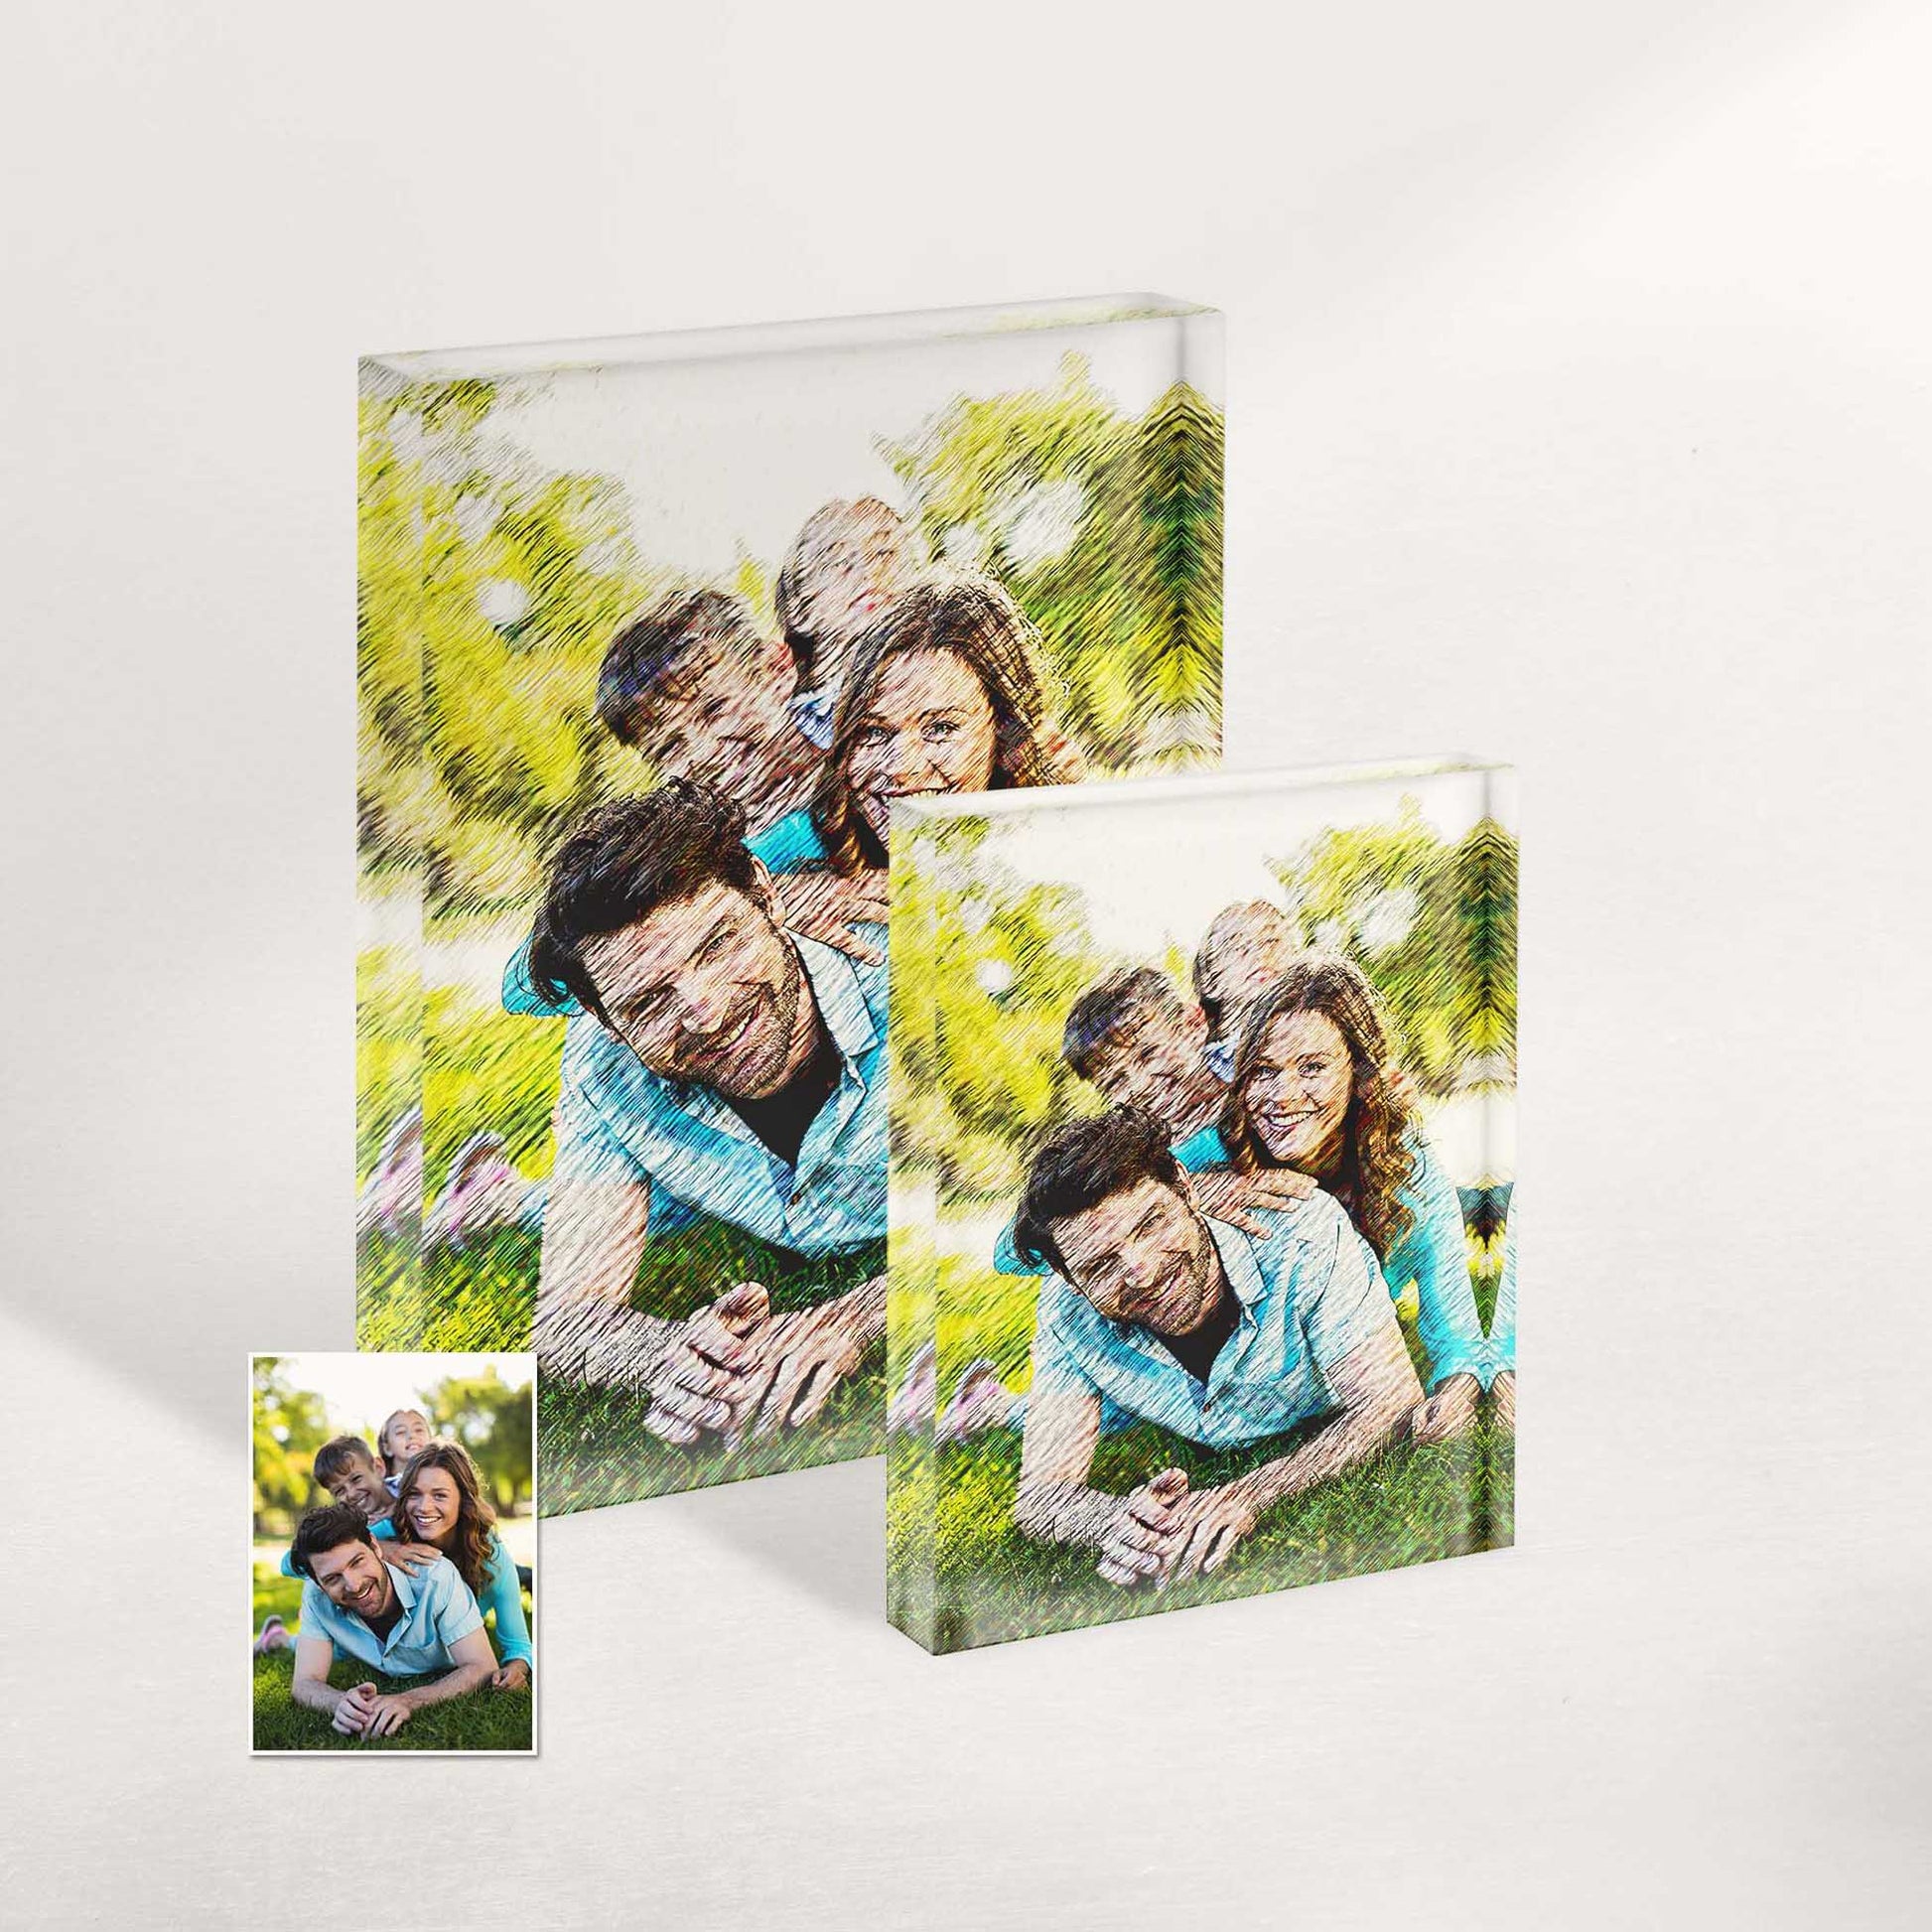 Artsy Inspiration for Your Home Decor: Personalized Acrylic Block Photo: Add a touch of creativity and inspiration to your living space with our artsy illustrations. Each acrylic block photo is an original piece of art